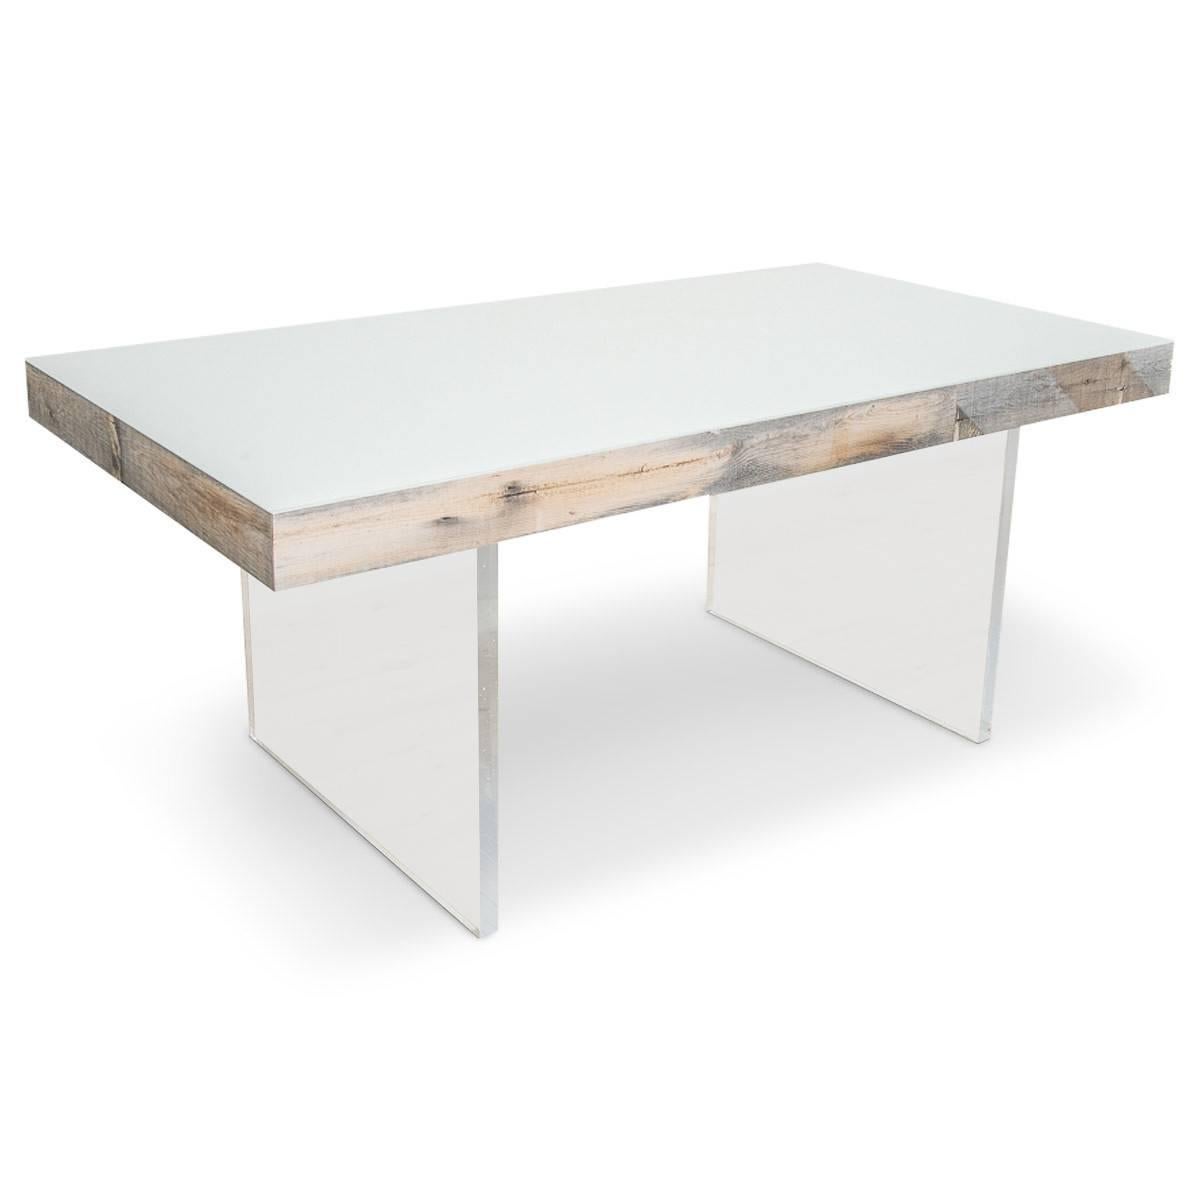 Our stylish new dining table is an Industrial modernist's dream. A beautiful glass top sits on recycled dark grey wood, standing on Lucite legs, creating the perfect mix of style and rugged functionality.

Dimensions:

96